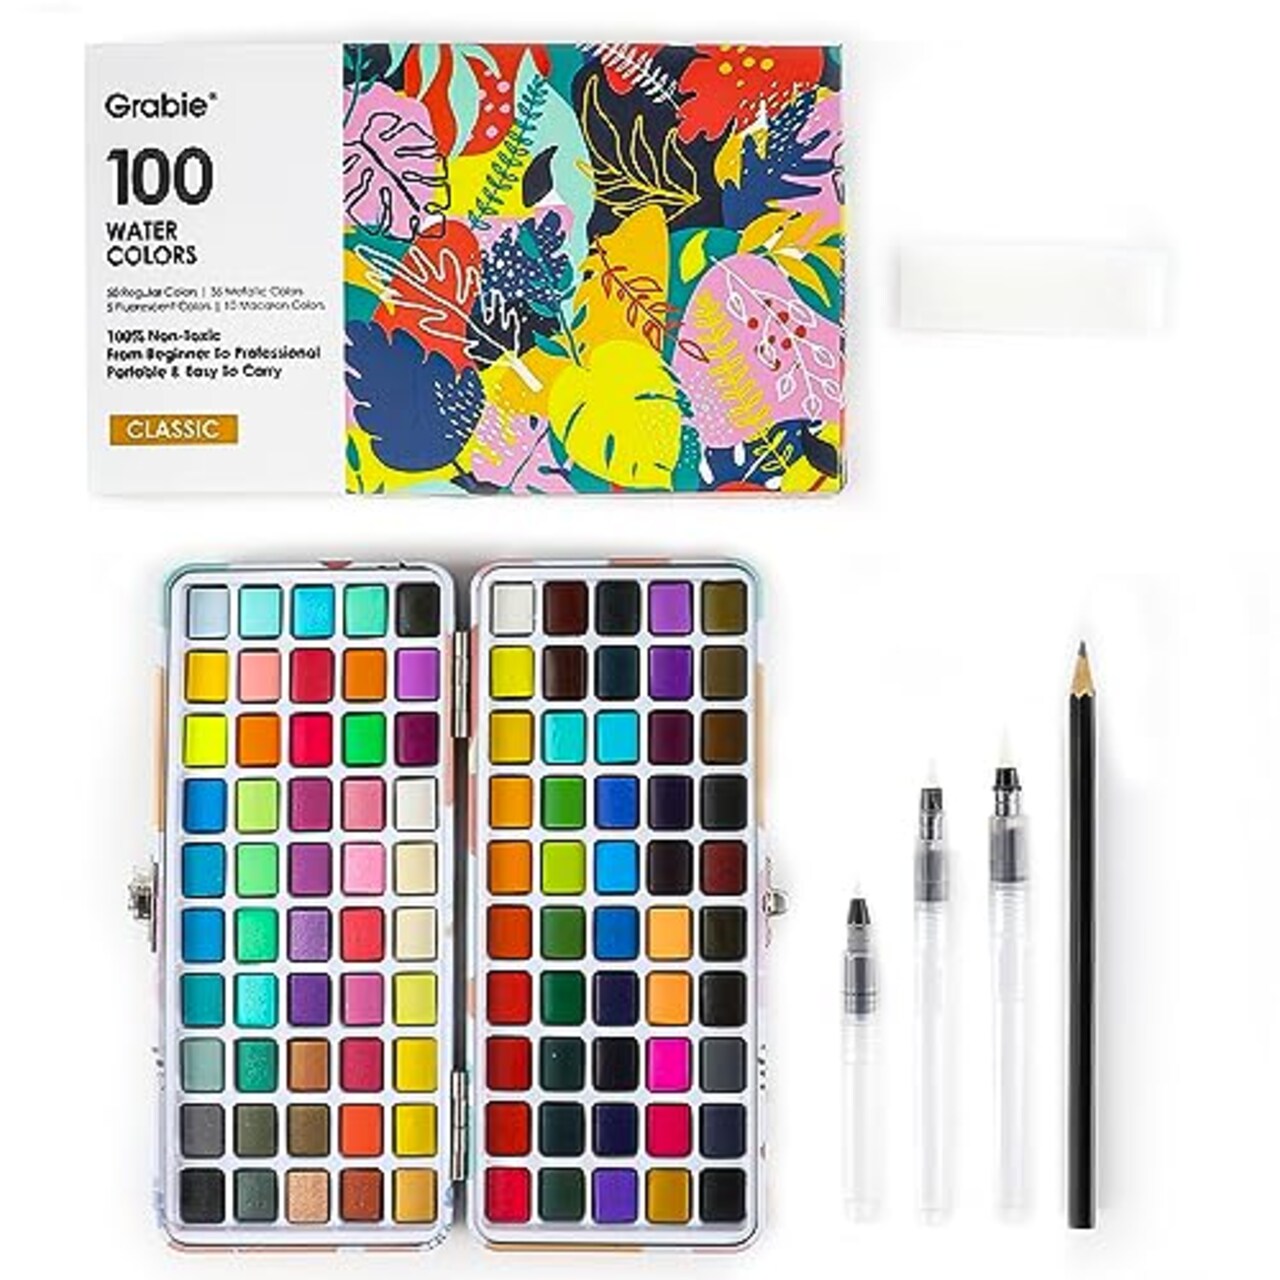 Grabie Watercolor Paint Set, 100 Colors Painting with Water Brush